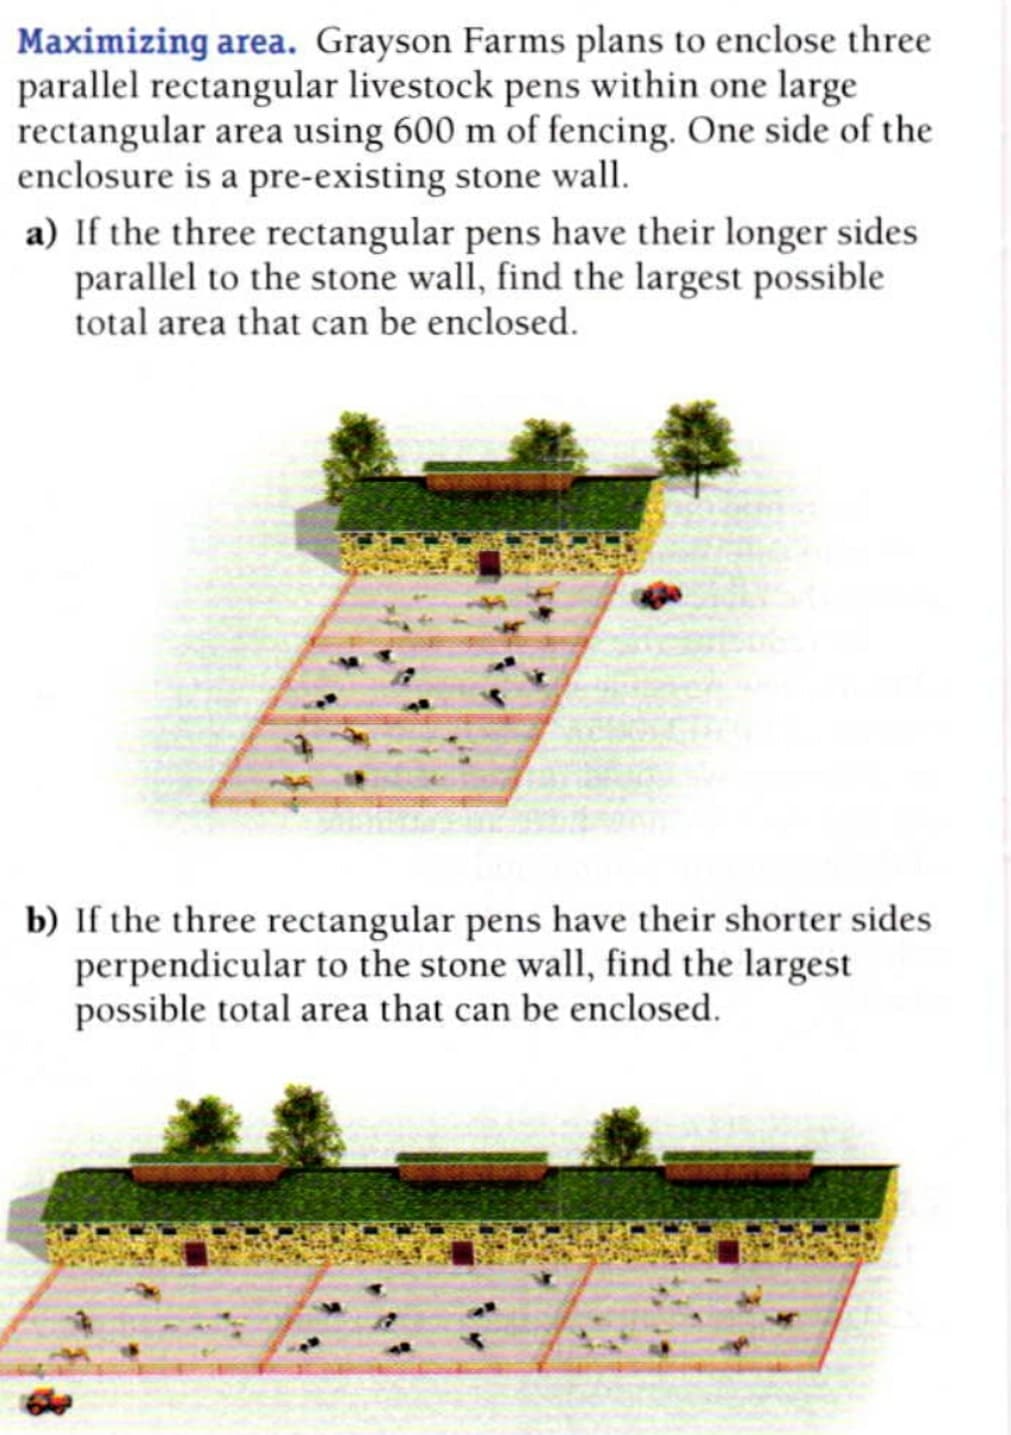 Maximizing area. Grayson Farms plans to enclose three
parallel rectangular livestock pens within one large
rectangular area using 600 m of fencing. One side of the
enclosure is a pre-existing stone wall.
a) If the three rectangular pens have their longer sides
parallel to the stone wall, find the largest possible
total area that can be enclosed.
b) If the three rectangular pens have their shorter sides
perpendicular to the stone wall, find the largest
possible total area that can be enclosed.
